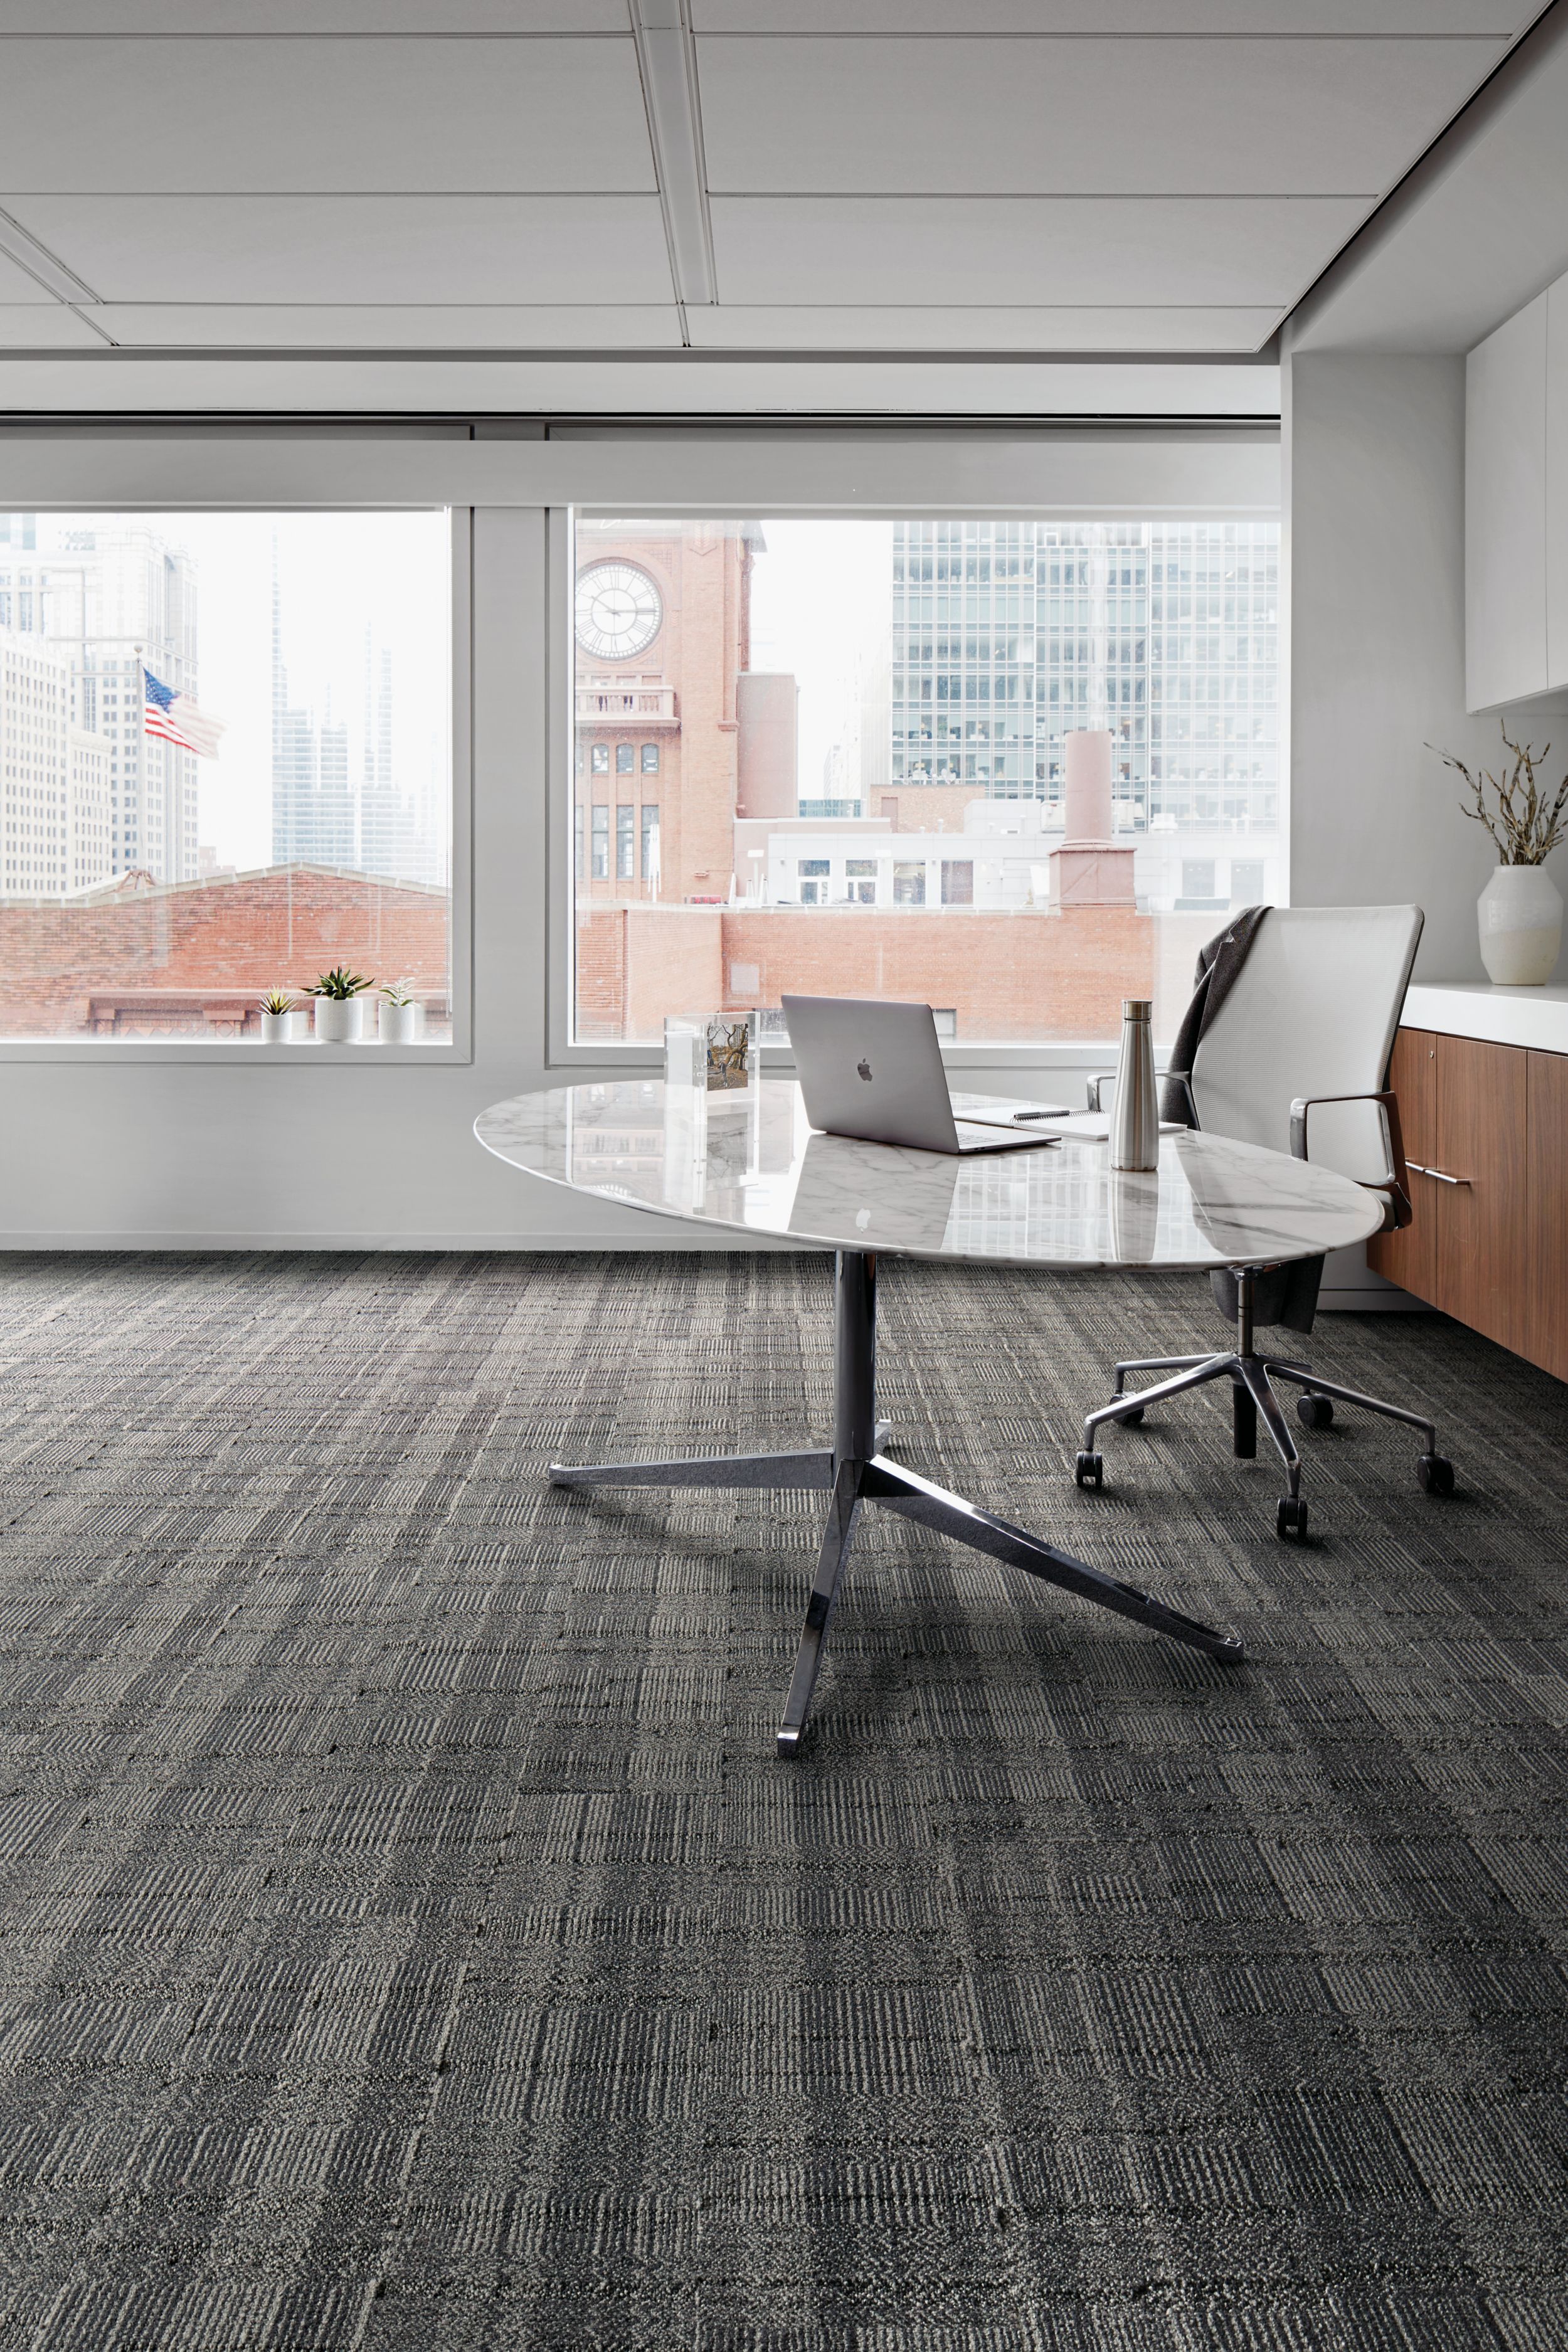 Interface Stitch Count plank carpet tile with table and chair by a window numéro d’image 1